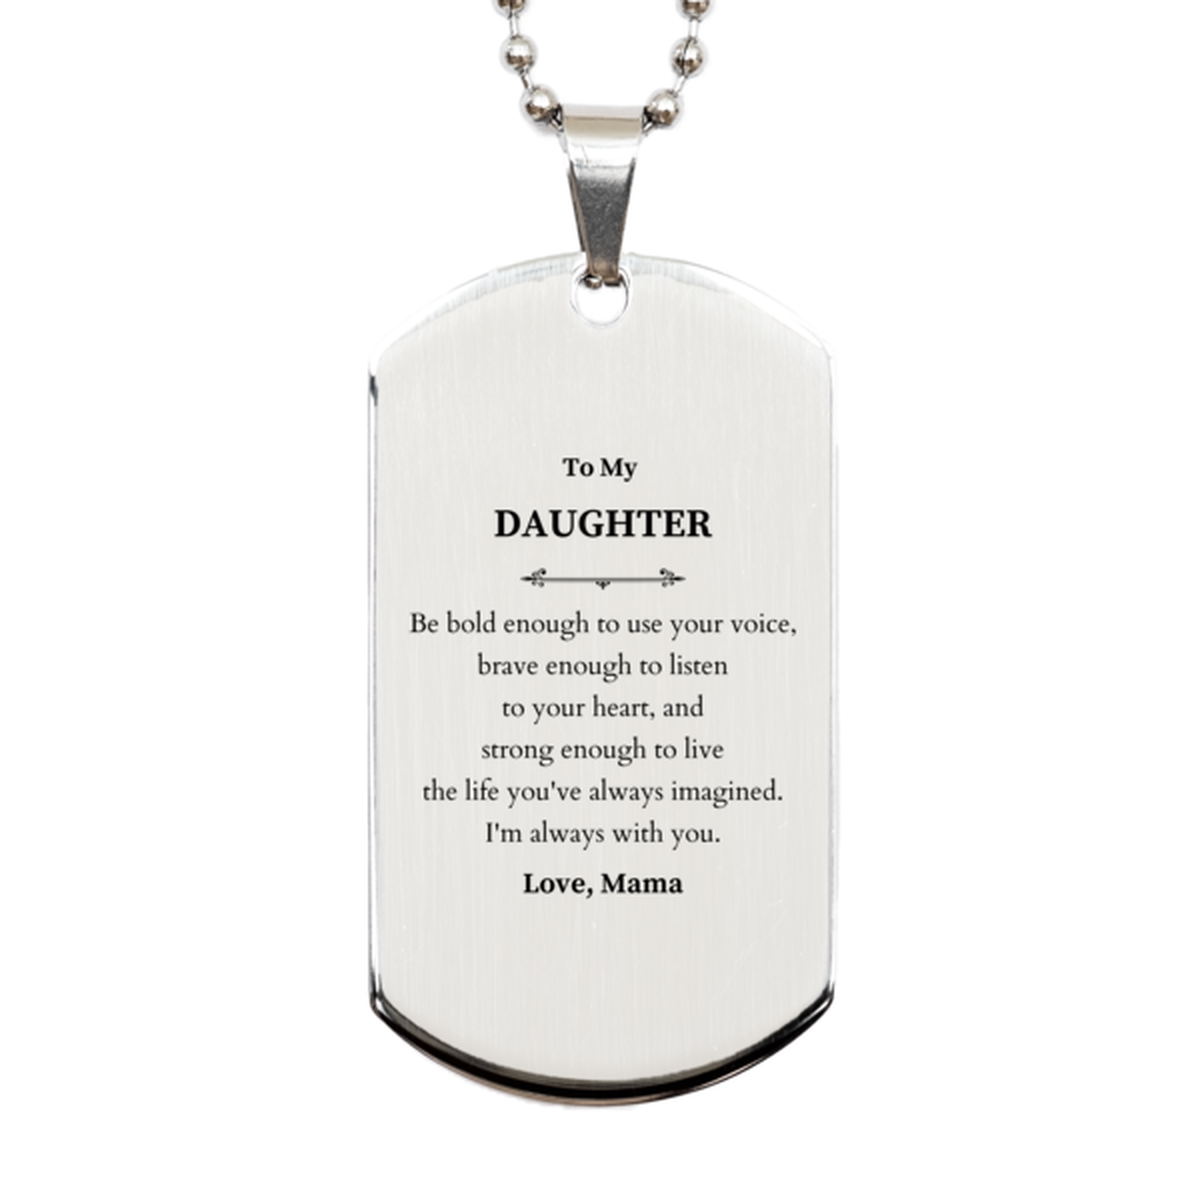 Keepsake Daughter Silver Dog Tag Gift Idea Graduation Christmas Birthday Daughter from Mama, Daughter Be bold enough to use your voice, brave enough to listen to your heart. Love, Mama